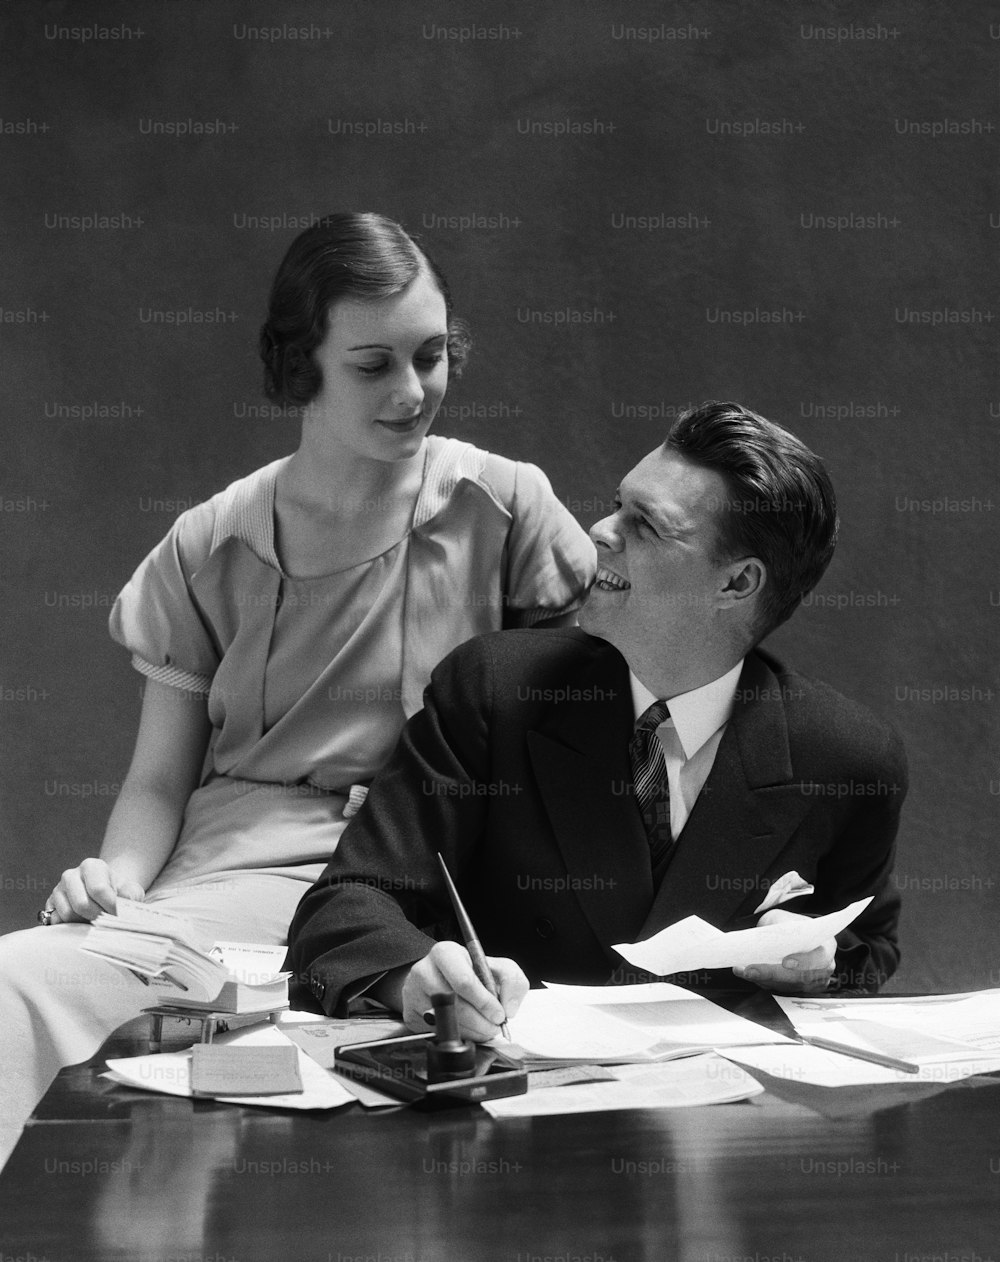 UNITED STATES - CIRCA 1930s:  Couple sitting at desk, man looking up at woman seated on arm of the chair.